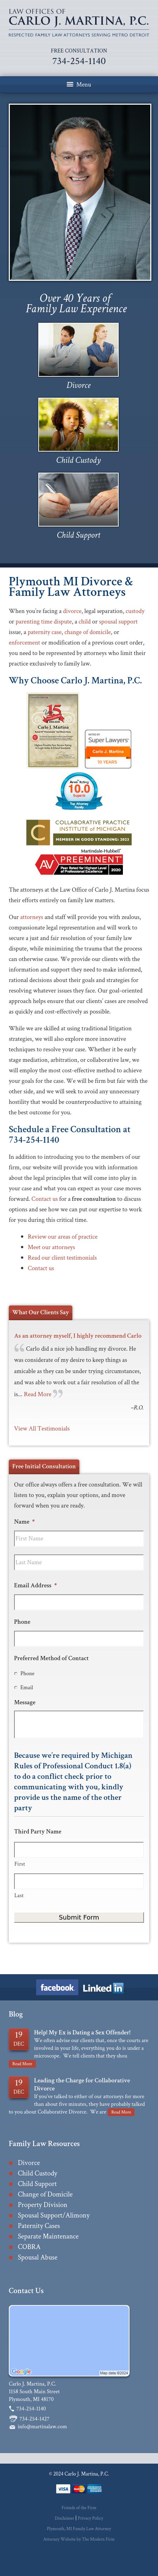 Law Offices of Carlo J. Martina, P.C. - Plymouth MI Lawyers